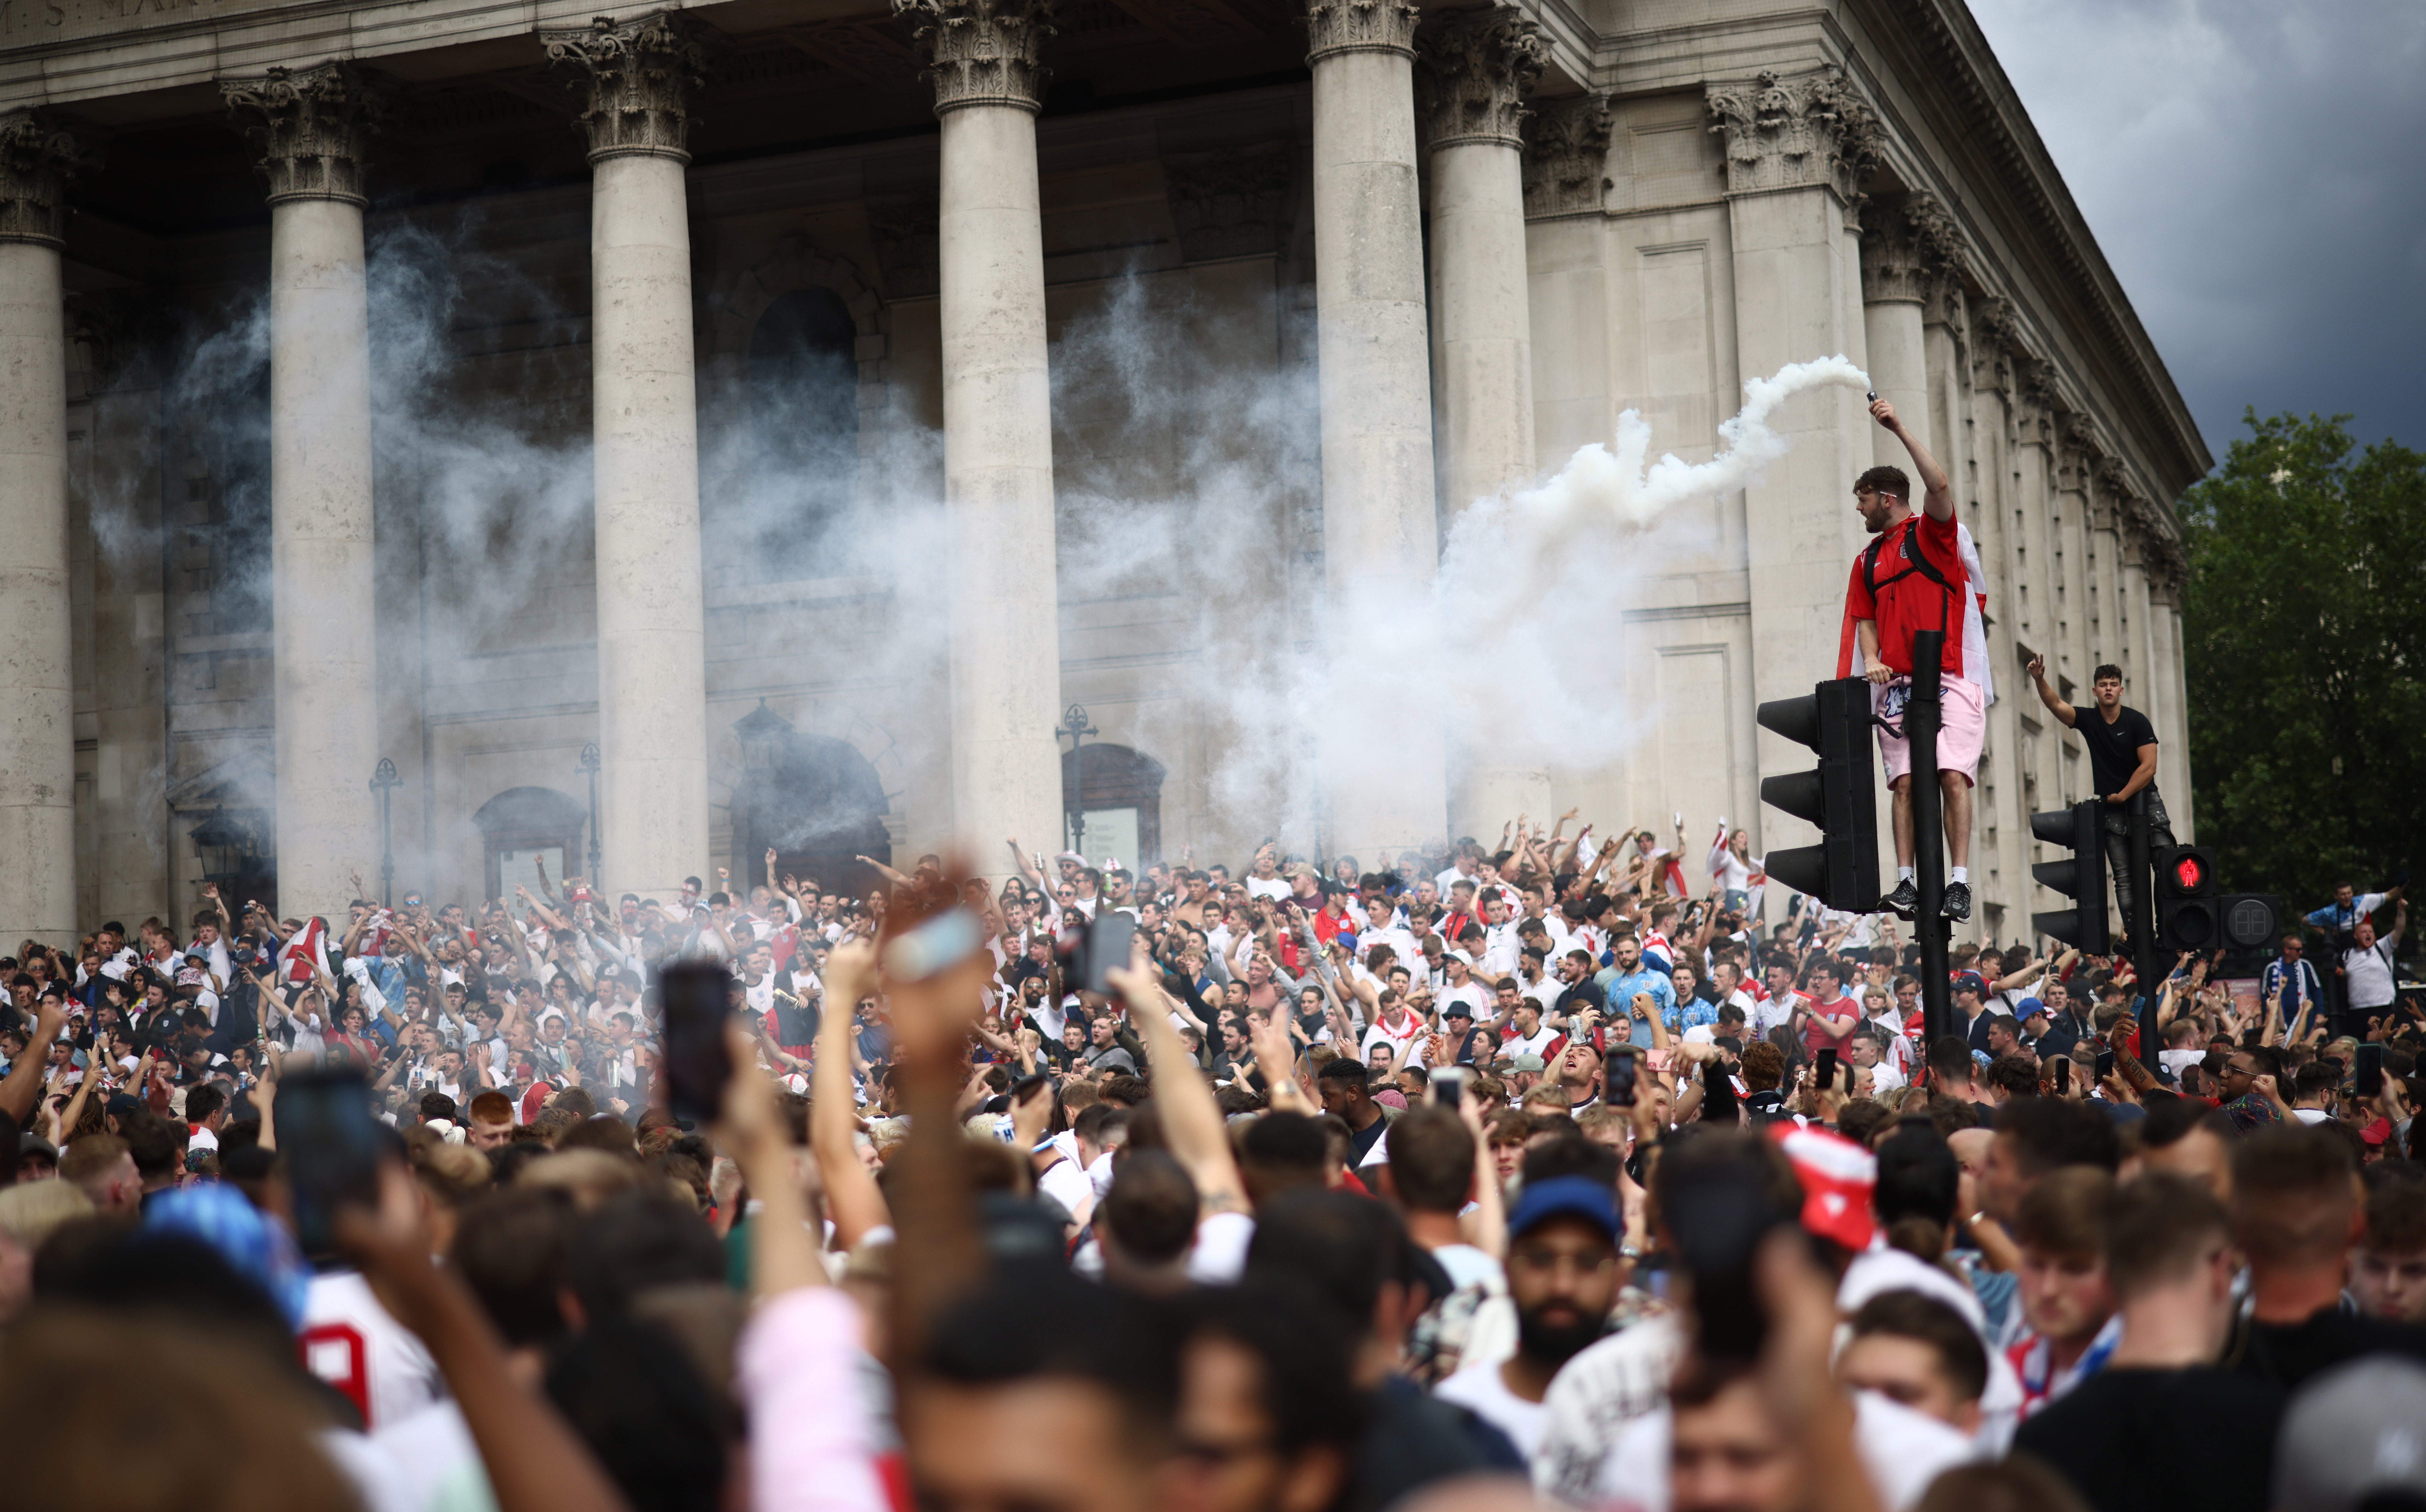 Euro 2020 - Fans gather for Italy v England